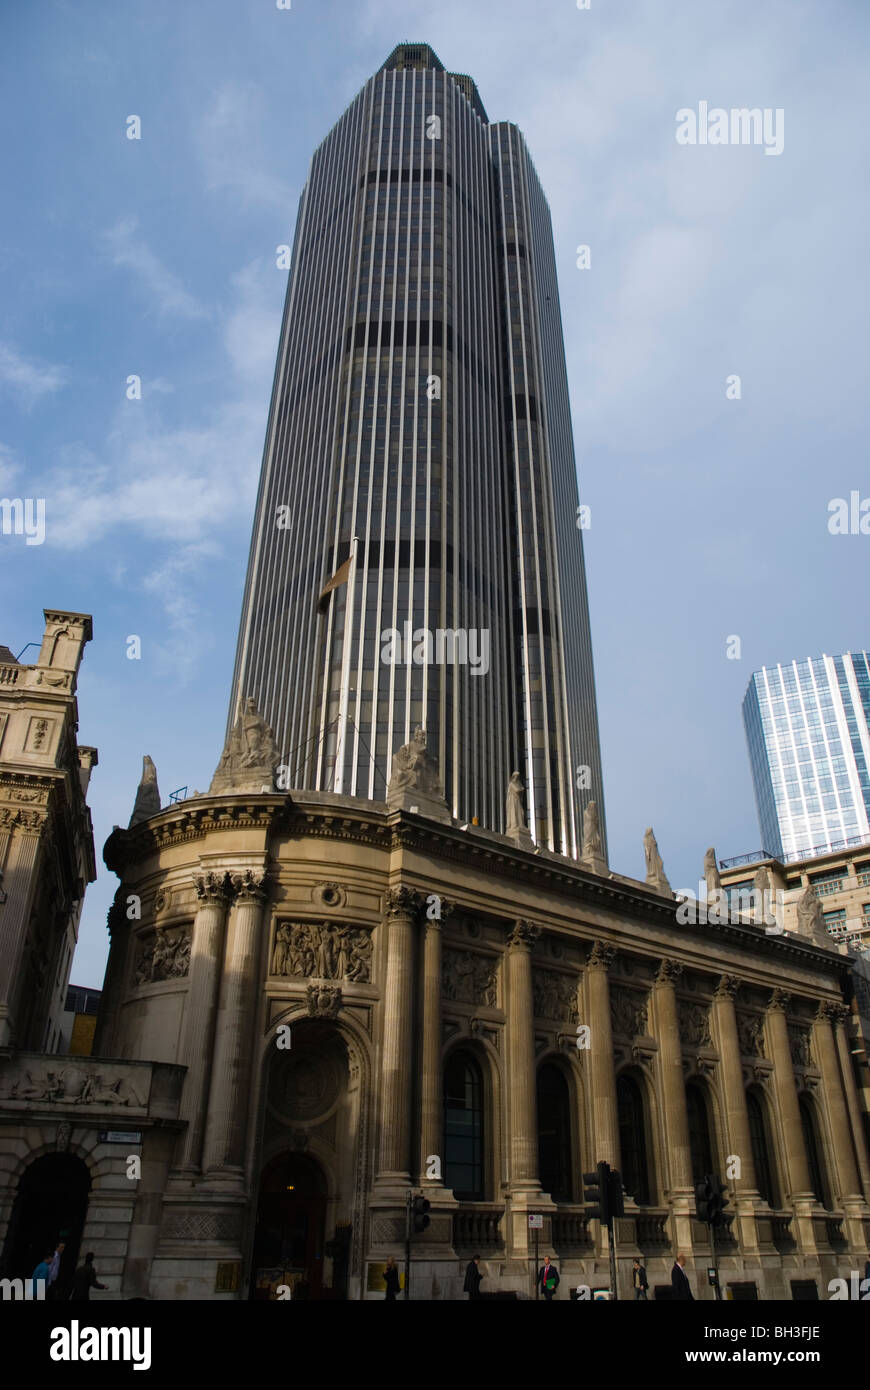 Tower 42 formerly know as Natwest tower City of London England UK Europe Stock Photo